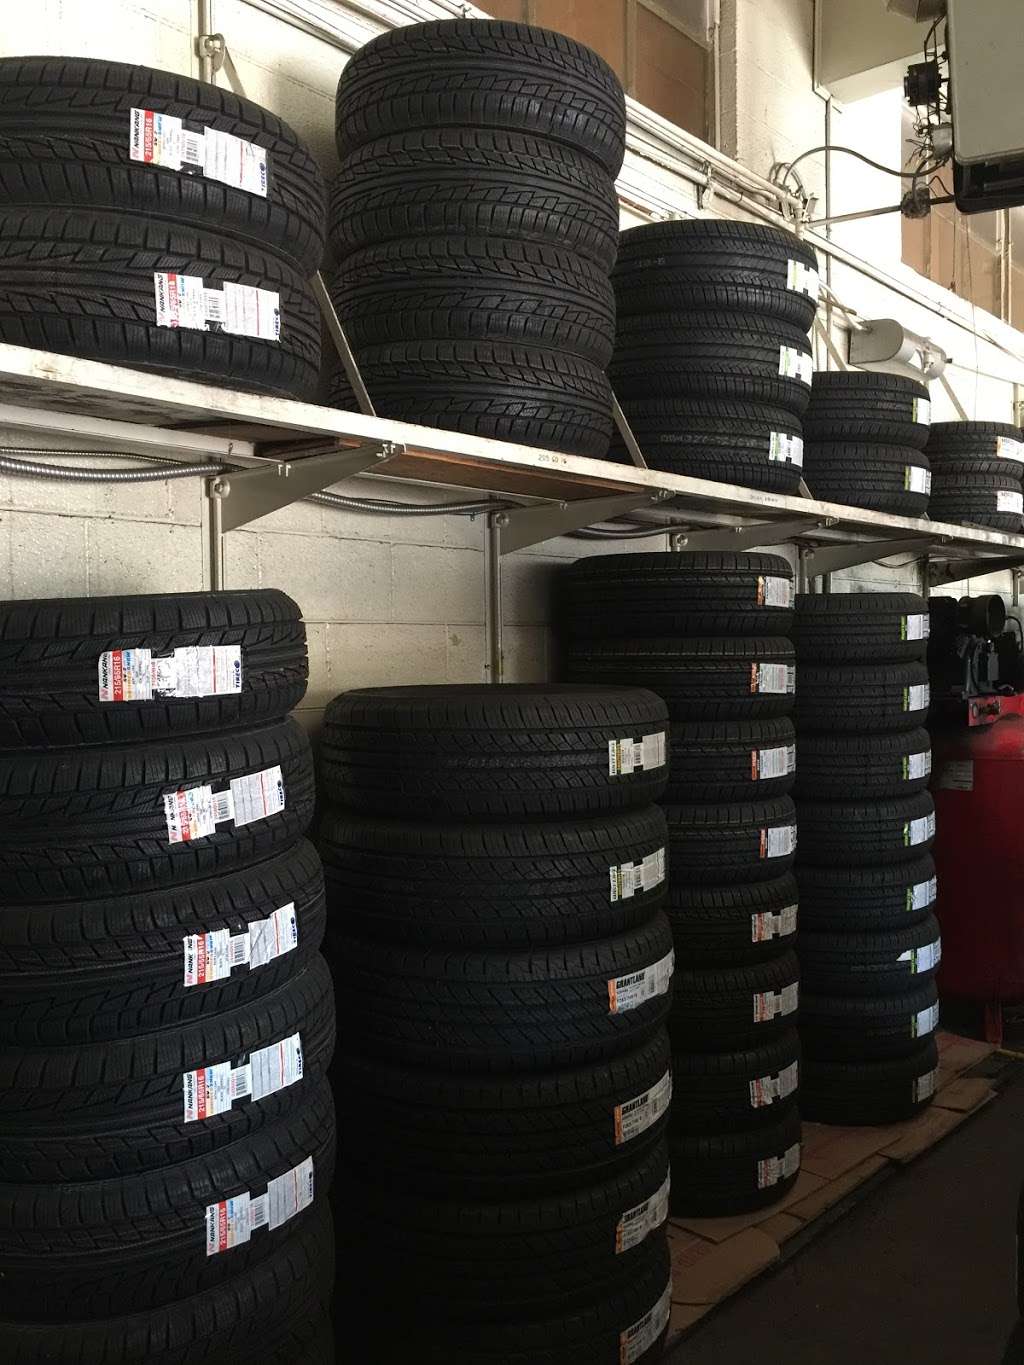 Montview Tires New & Used | 11701 E Montview Blvd, Aurora, CO 80010 | Phone: (720) 859-3603